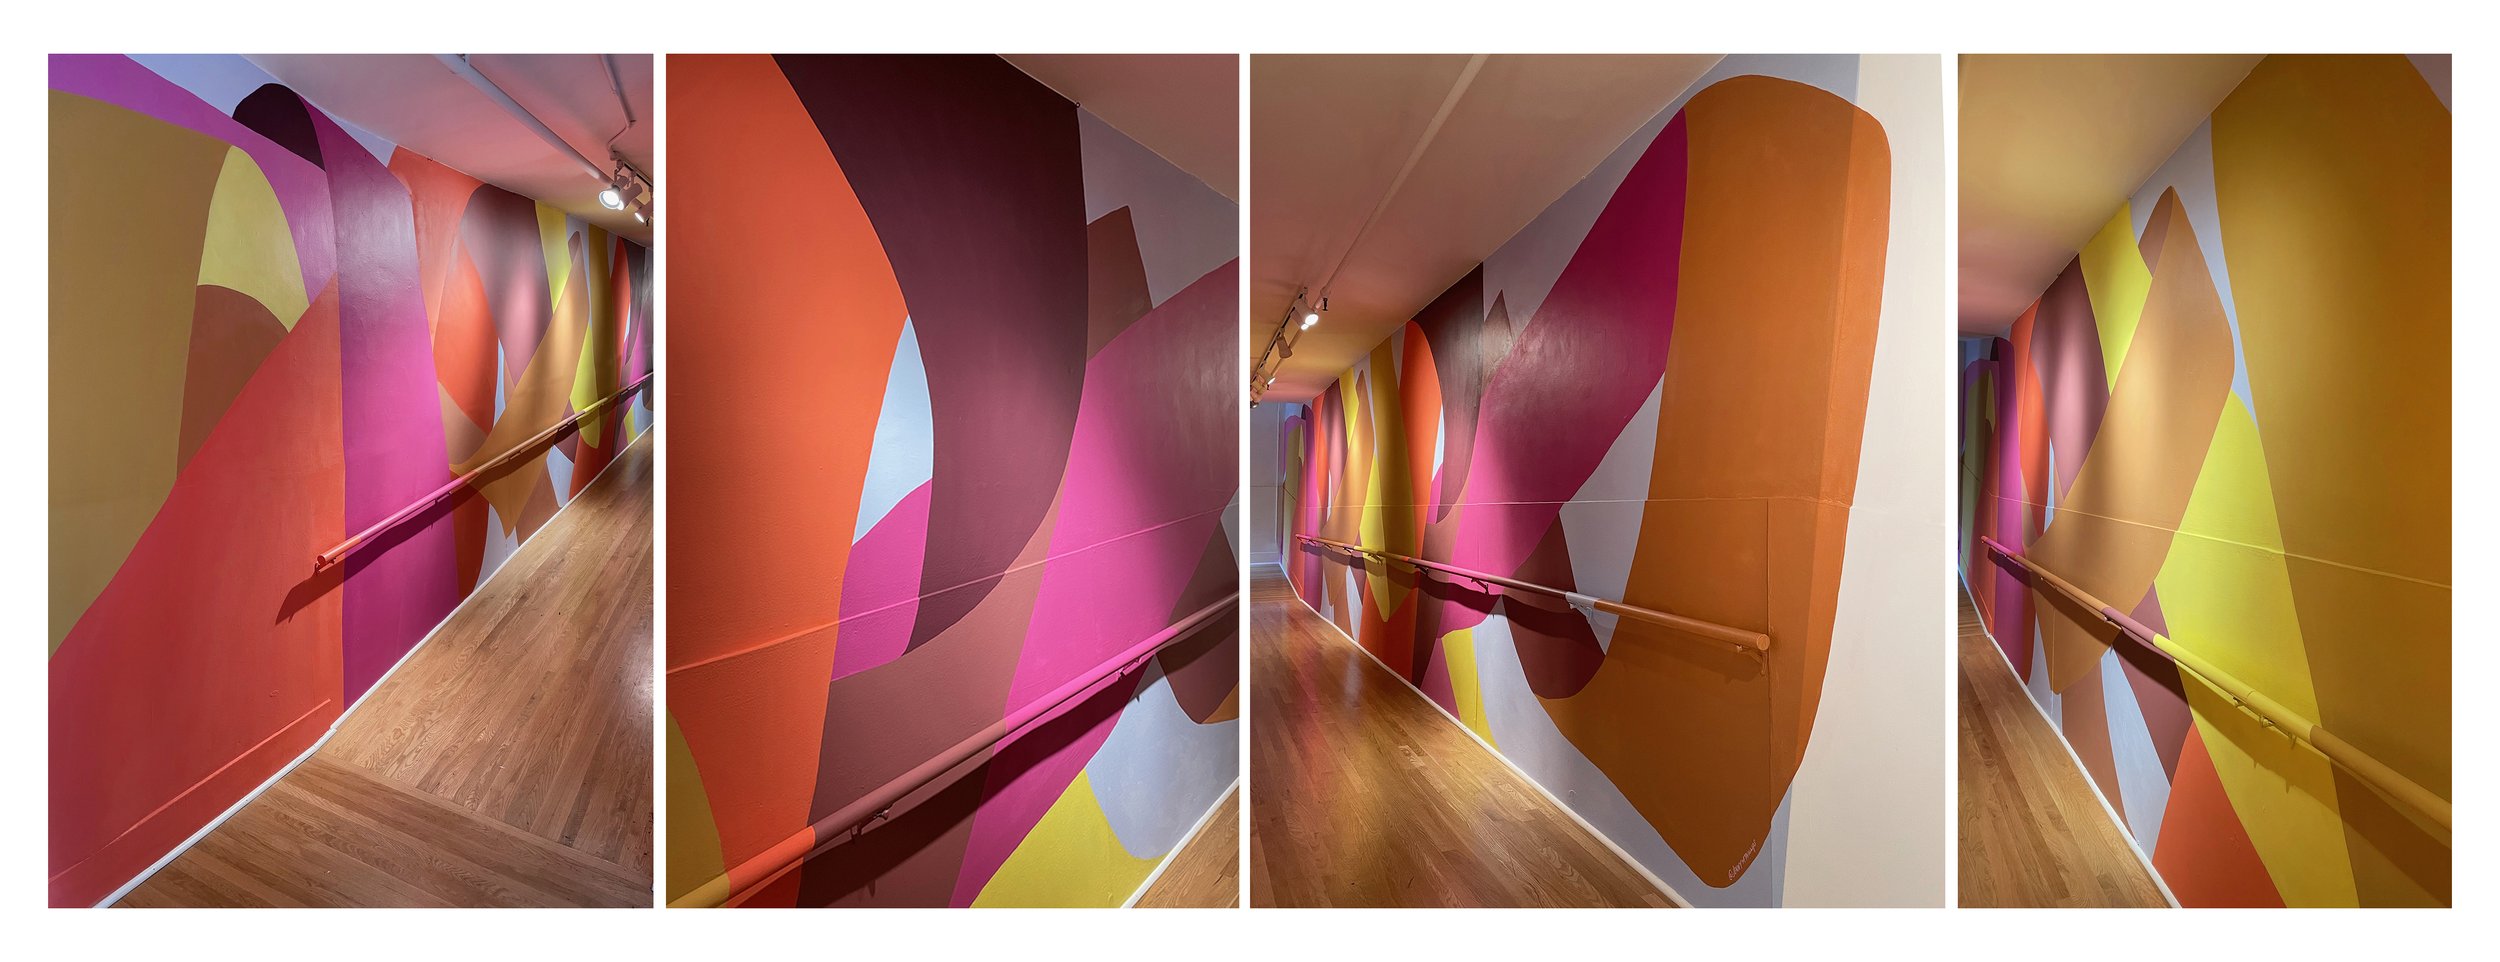  Incline Gallery Meandering Mural, 2023 8.5 x 40 feet Recycled house paint  “Meandering” is designed to draw the viewer up the long Incline Gallery access ramp. Bright colors and emphatic ribbon-like shapes carry the liveliness of Valencia Street int